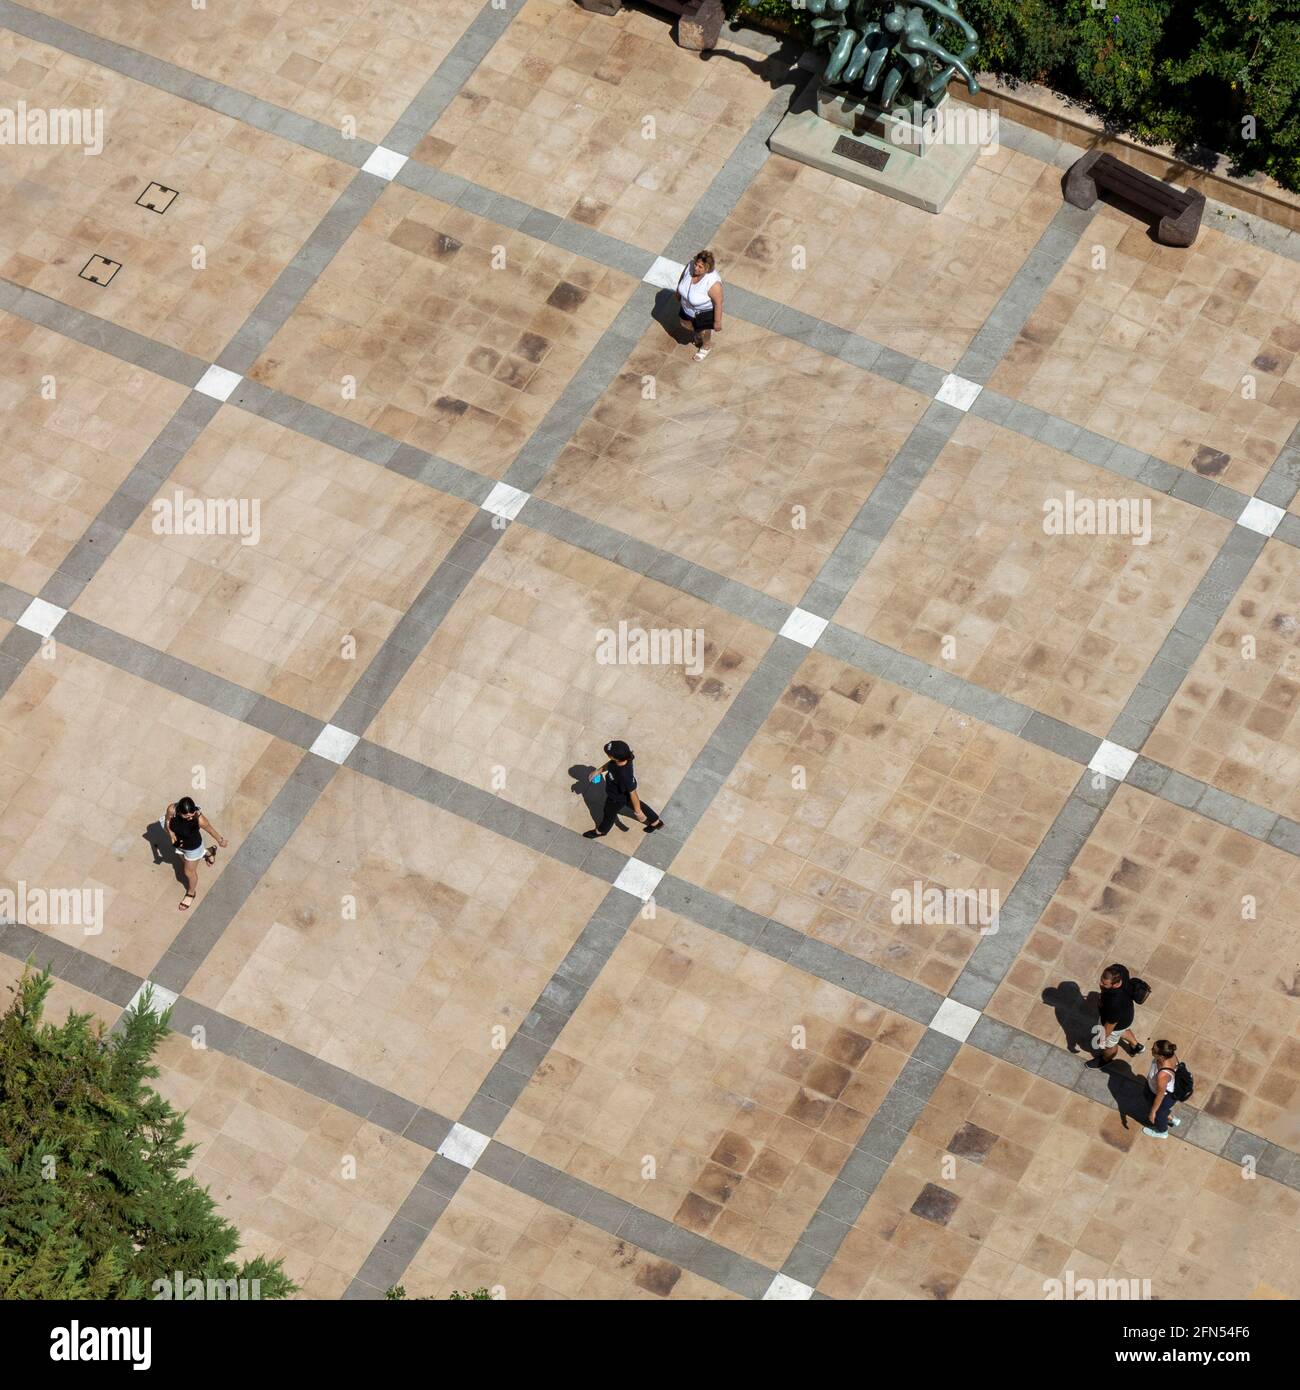 Overlooking a patio square intersection with tourists walking in the sunlight. Monte Carlo, Monaco. Stock Photo